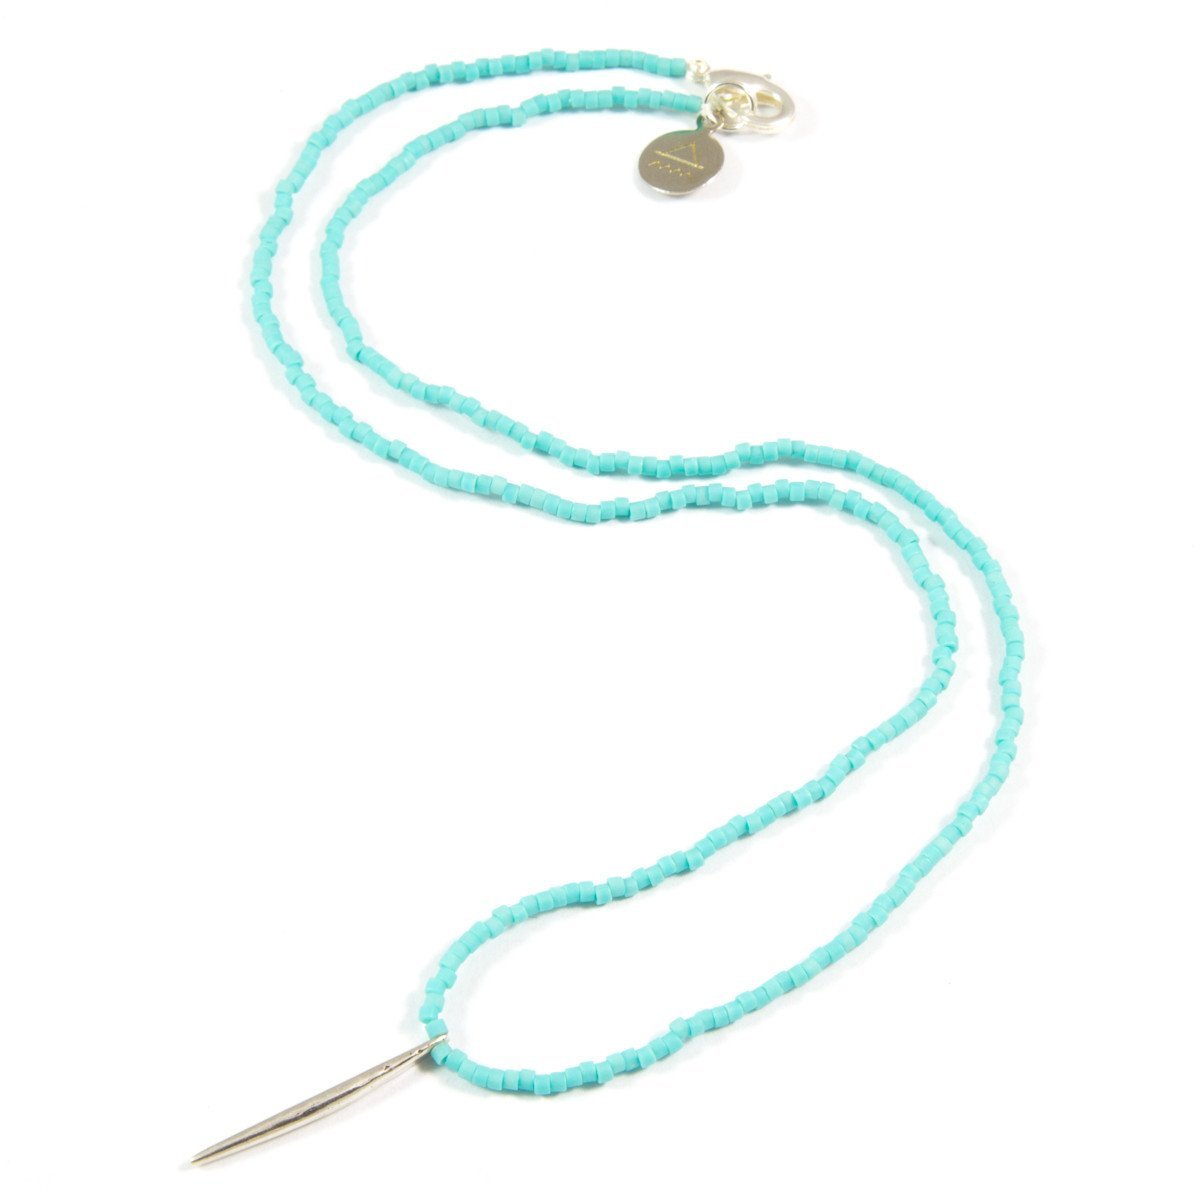 Teal Spike Necklace in Silver